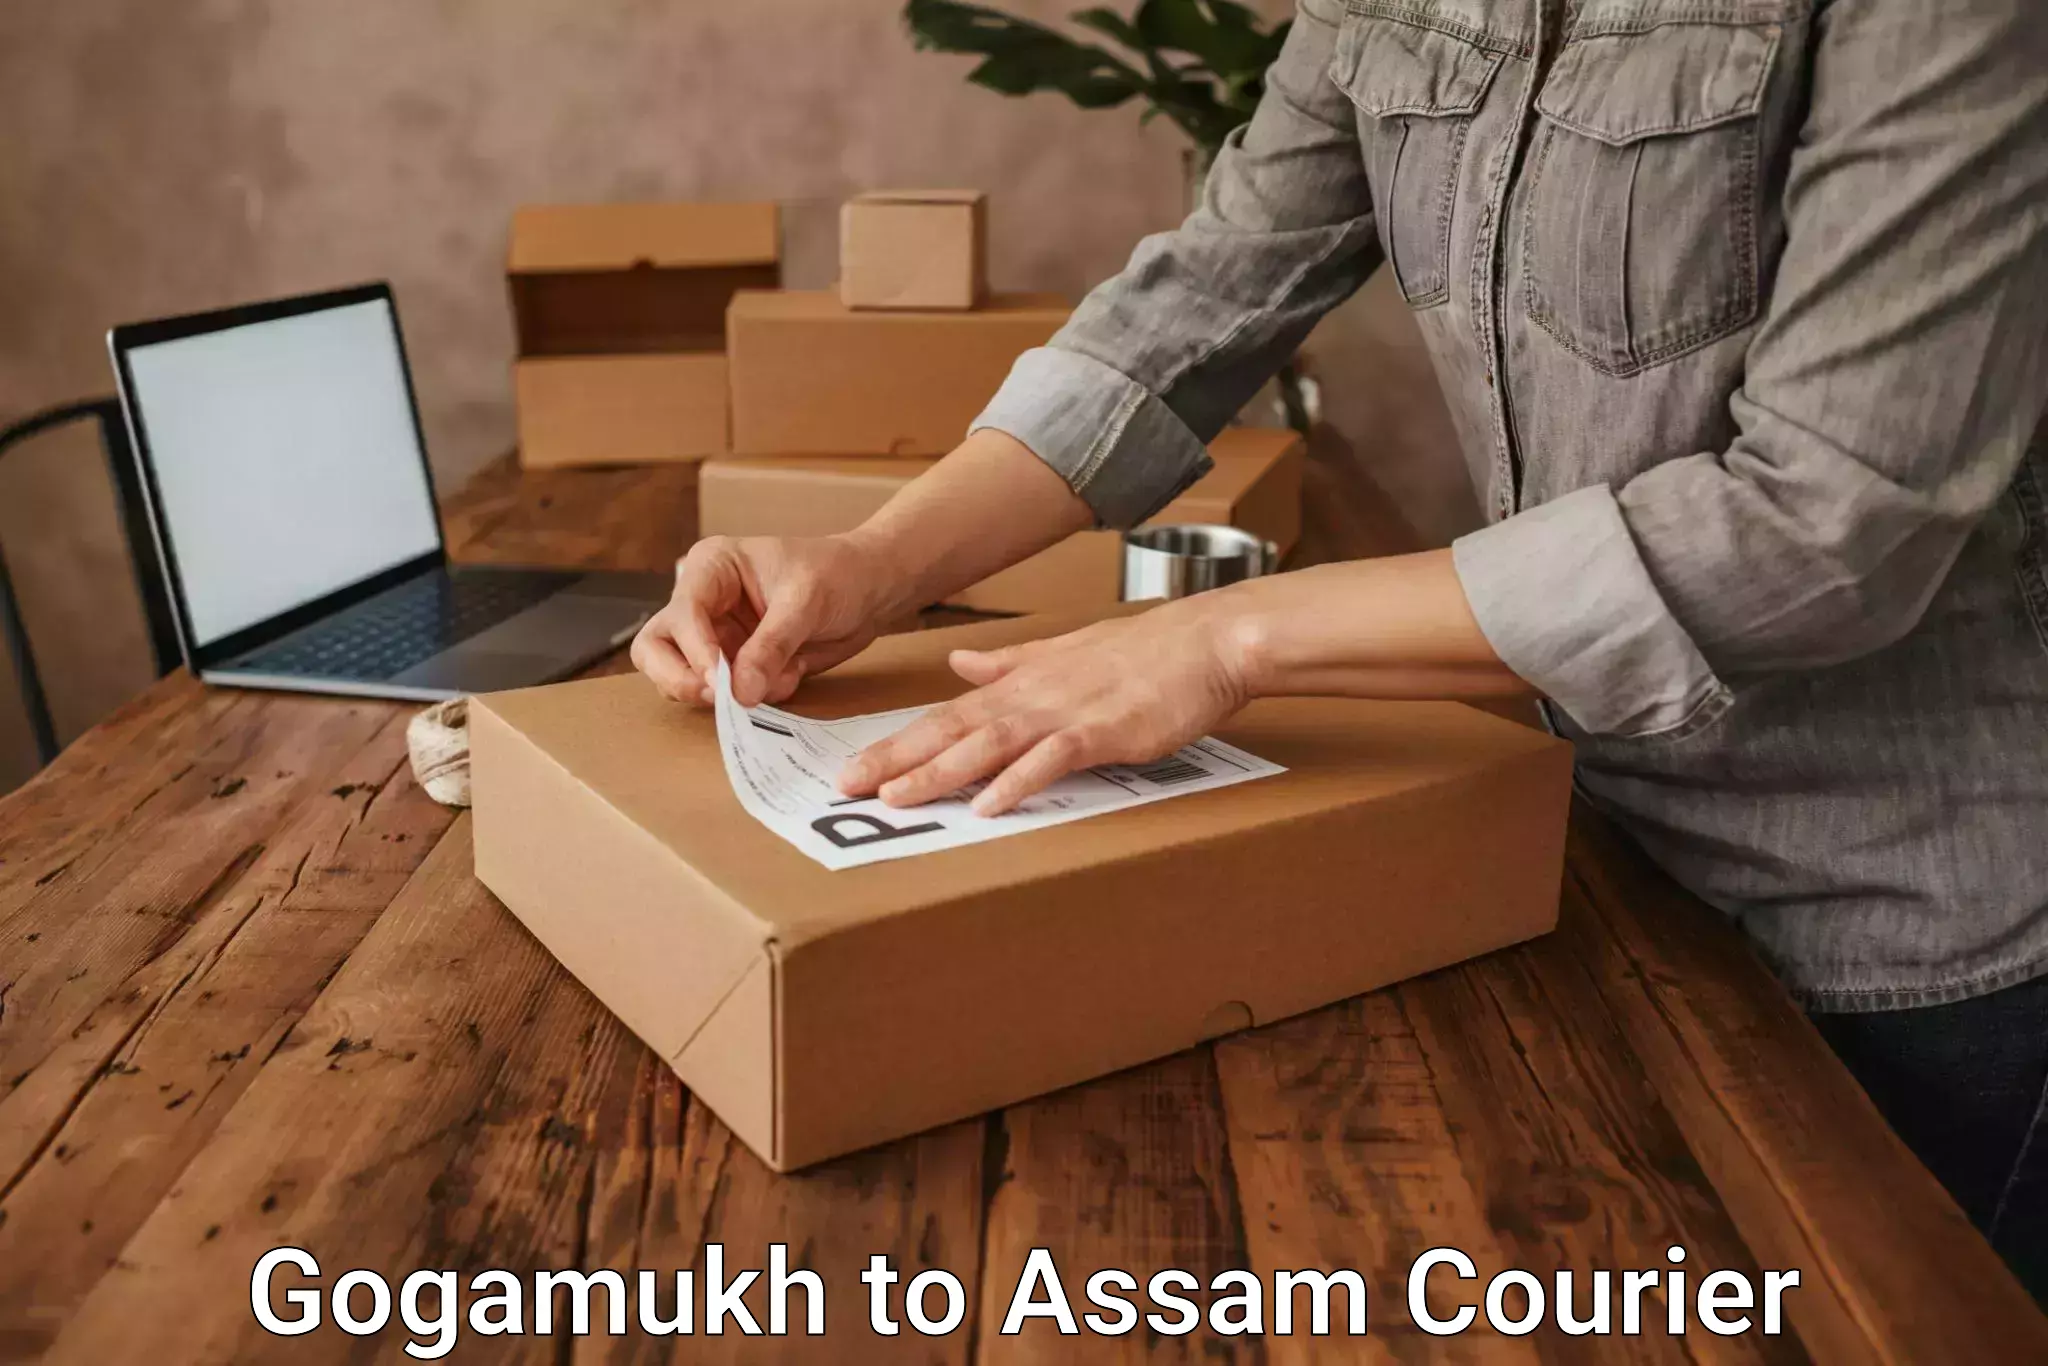 Nationwide delivery network Gogamukh to Karbi Anglong